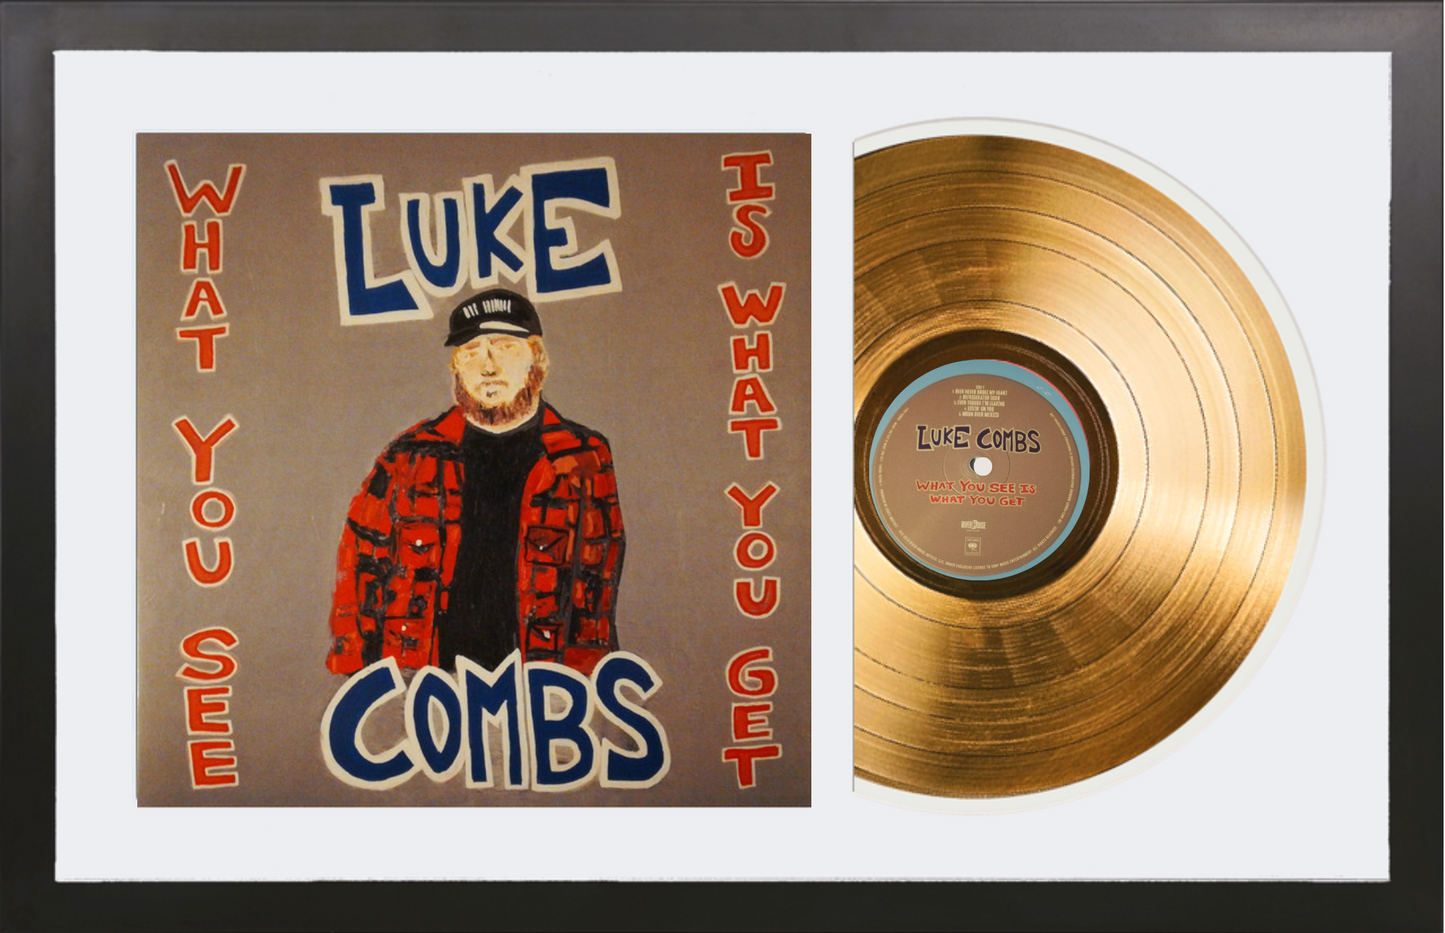 Luke Combs - What You See is What You Get - 14K Gold Framed Album